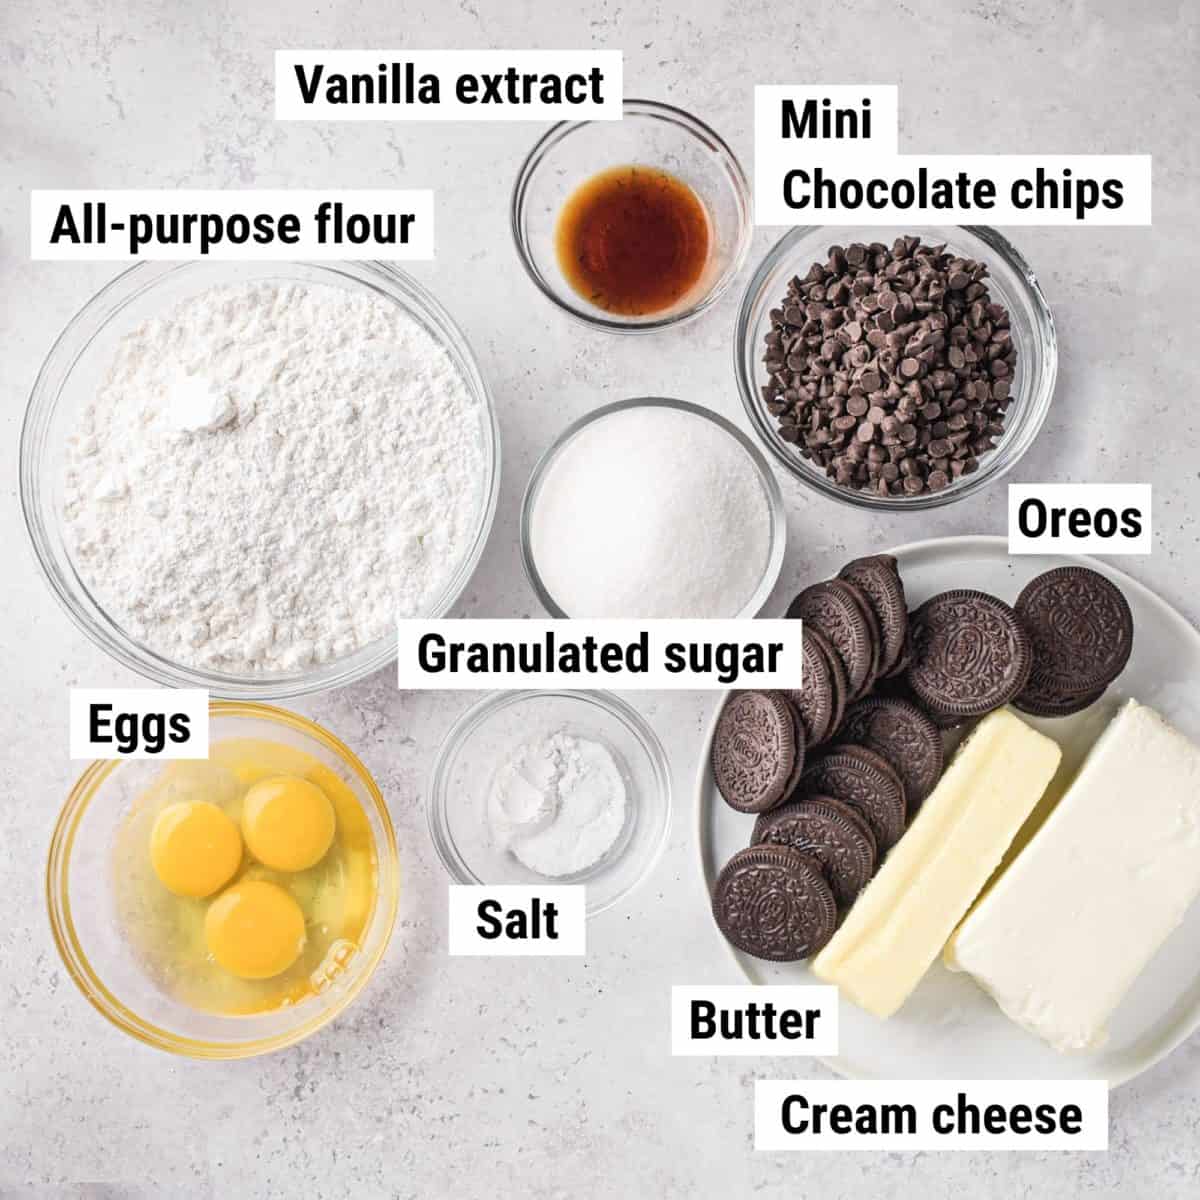 The recipe ingredients to make cookies and cream bars laid out on a table.